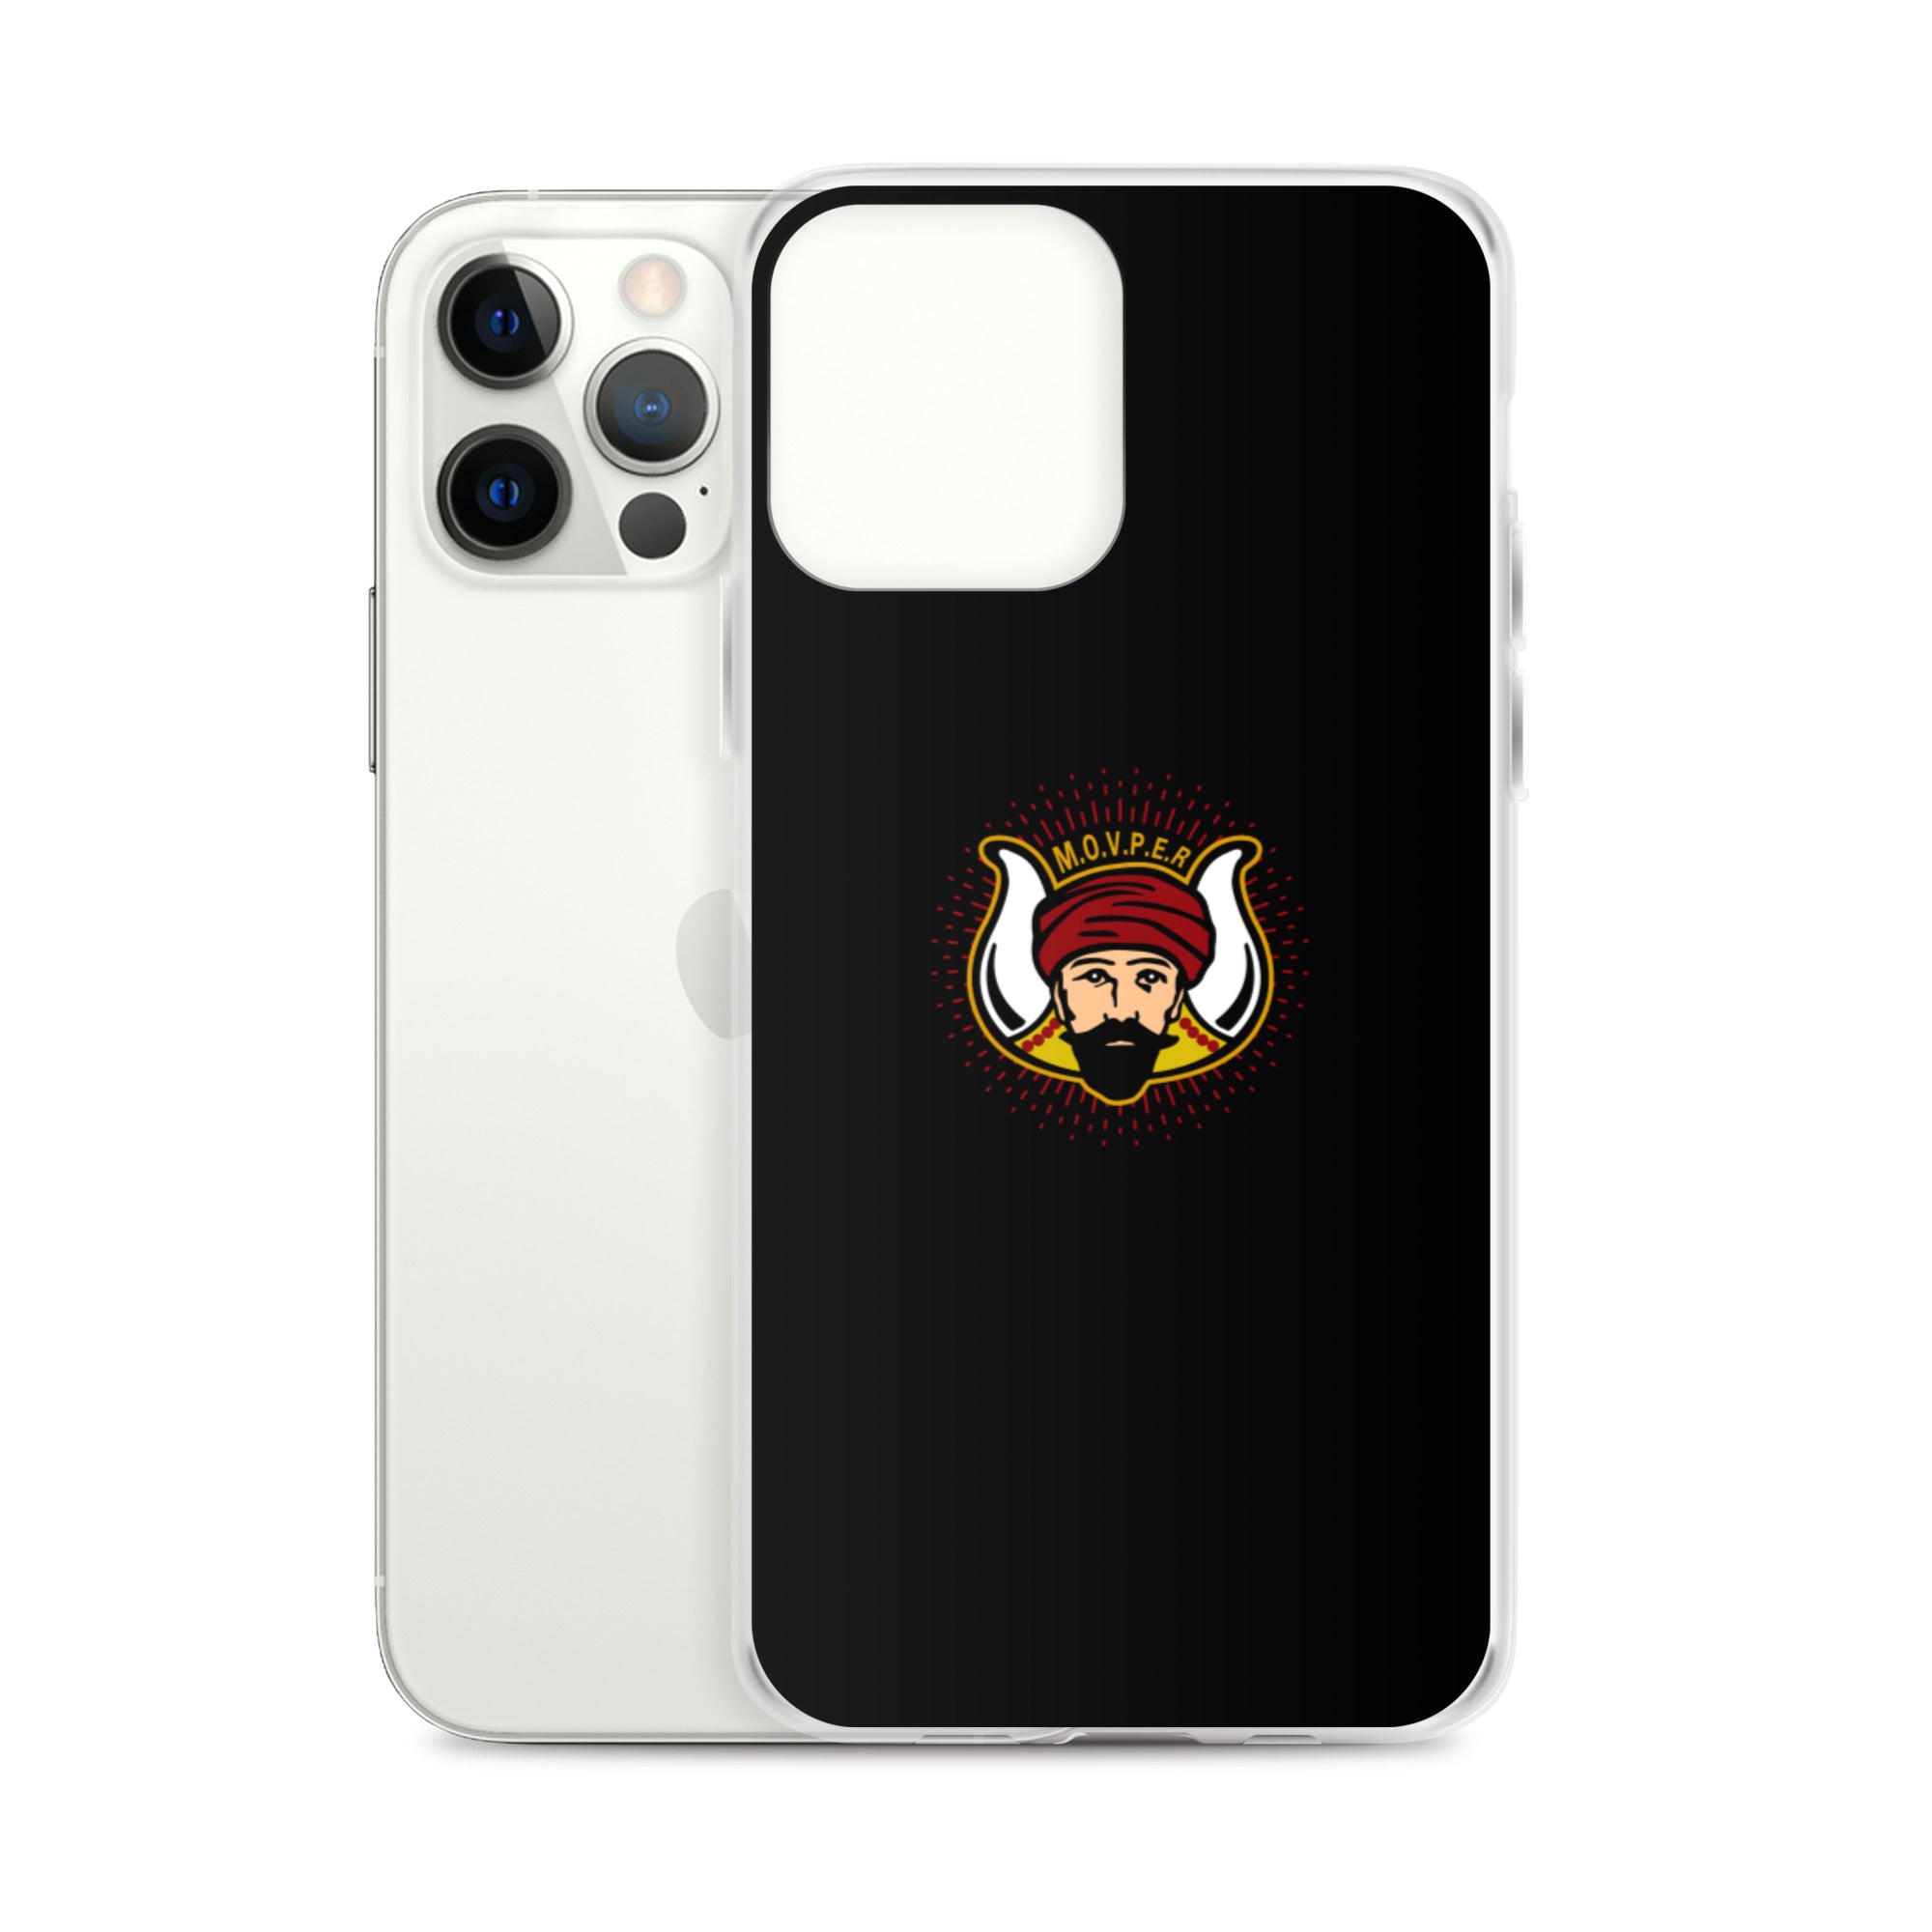 MOVPER No. 1 iPhone Case